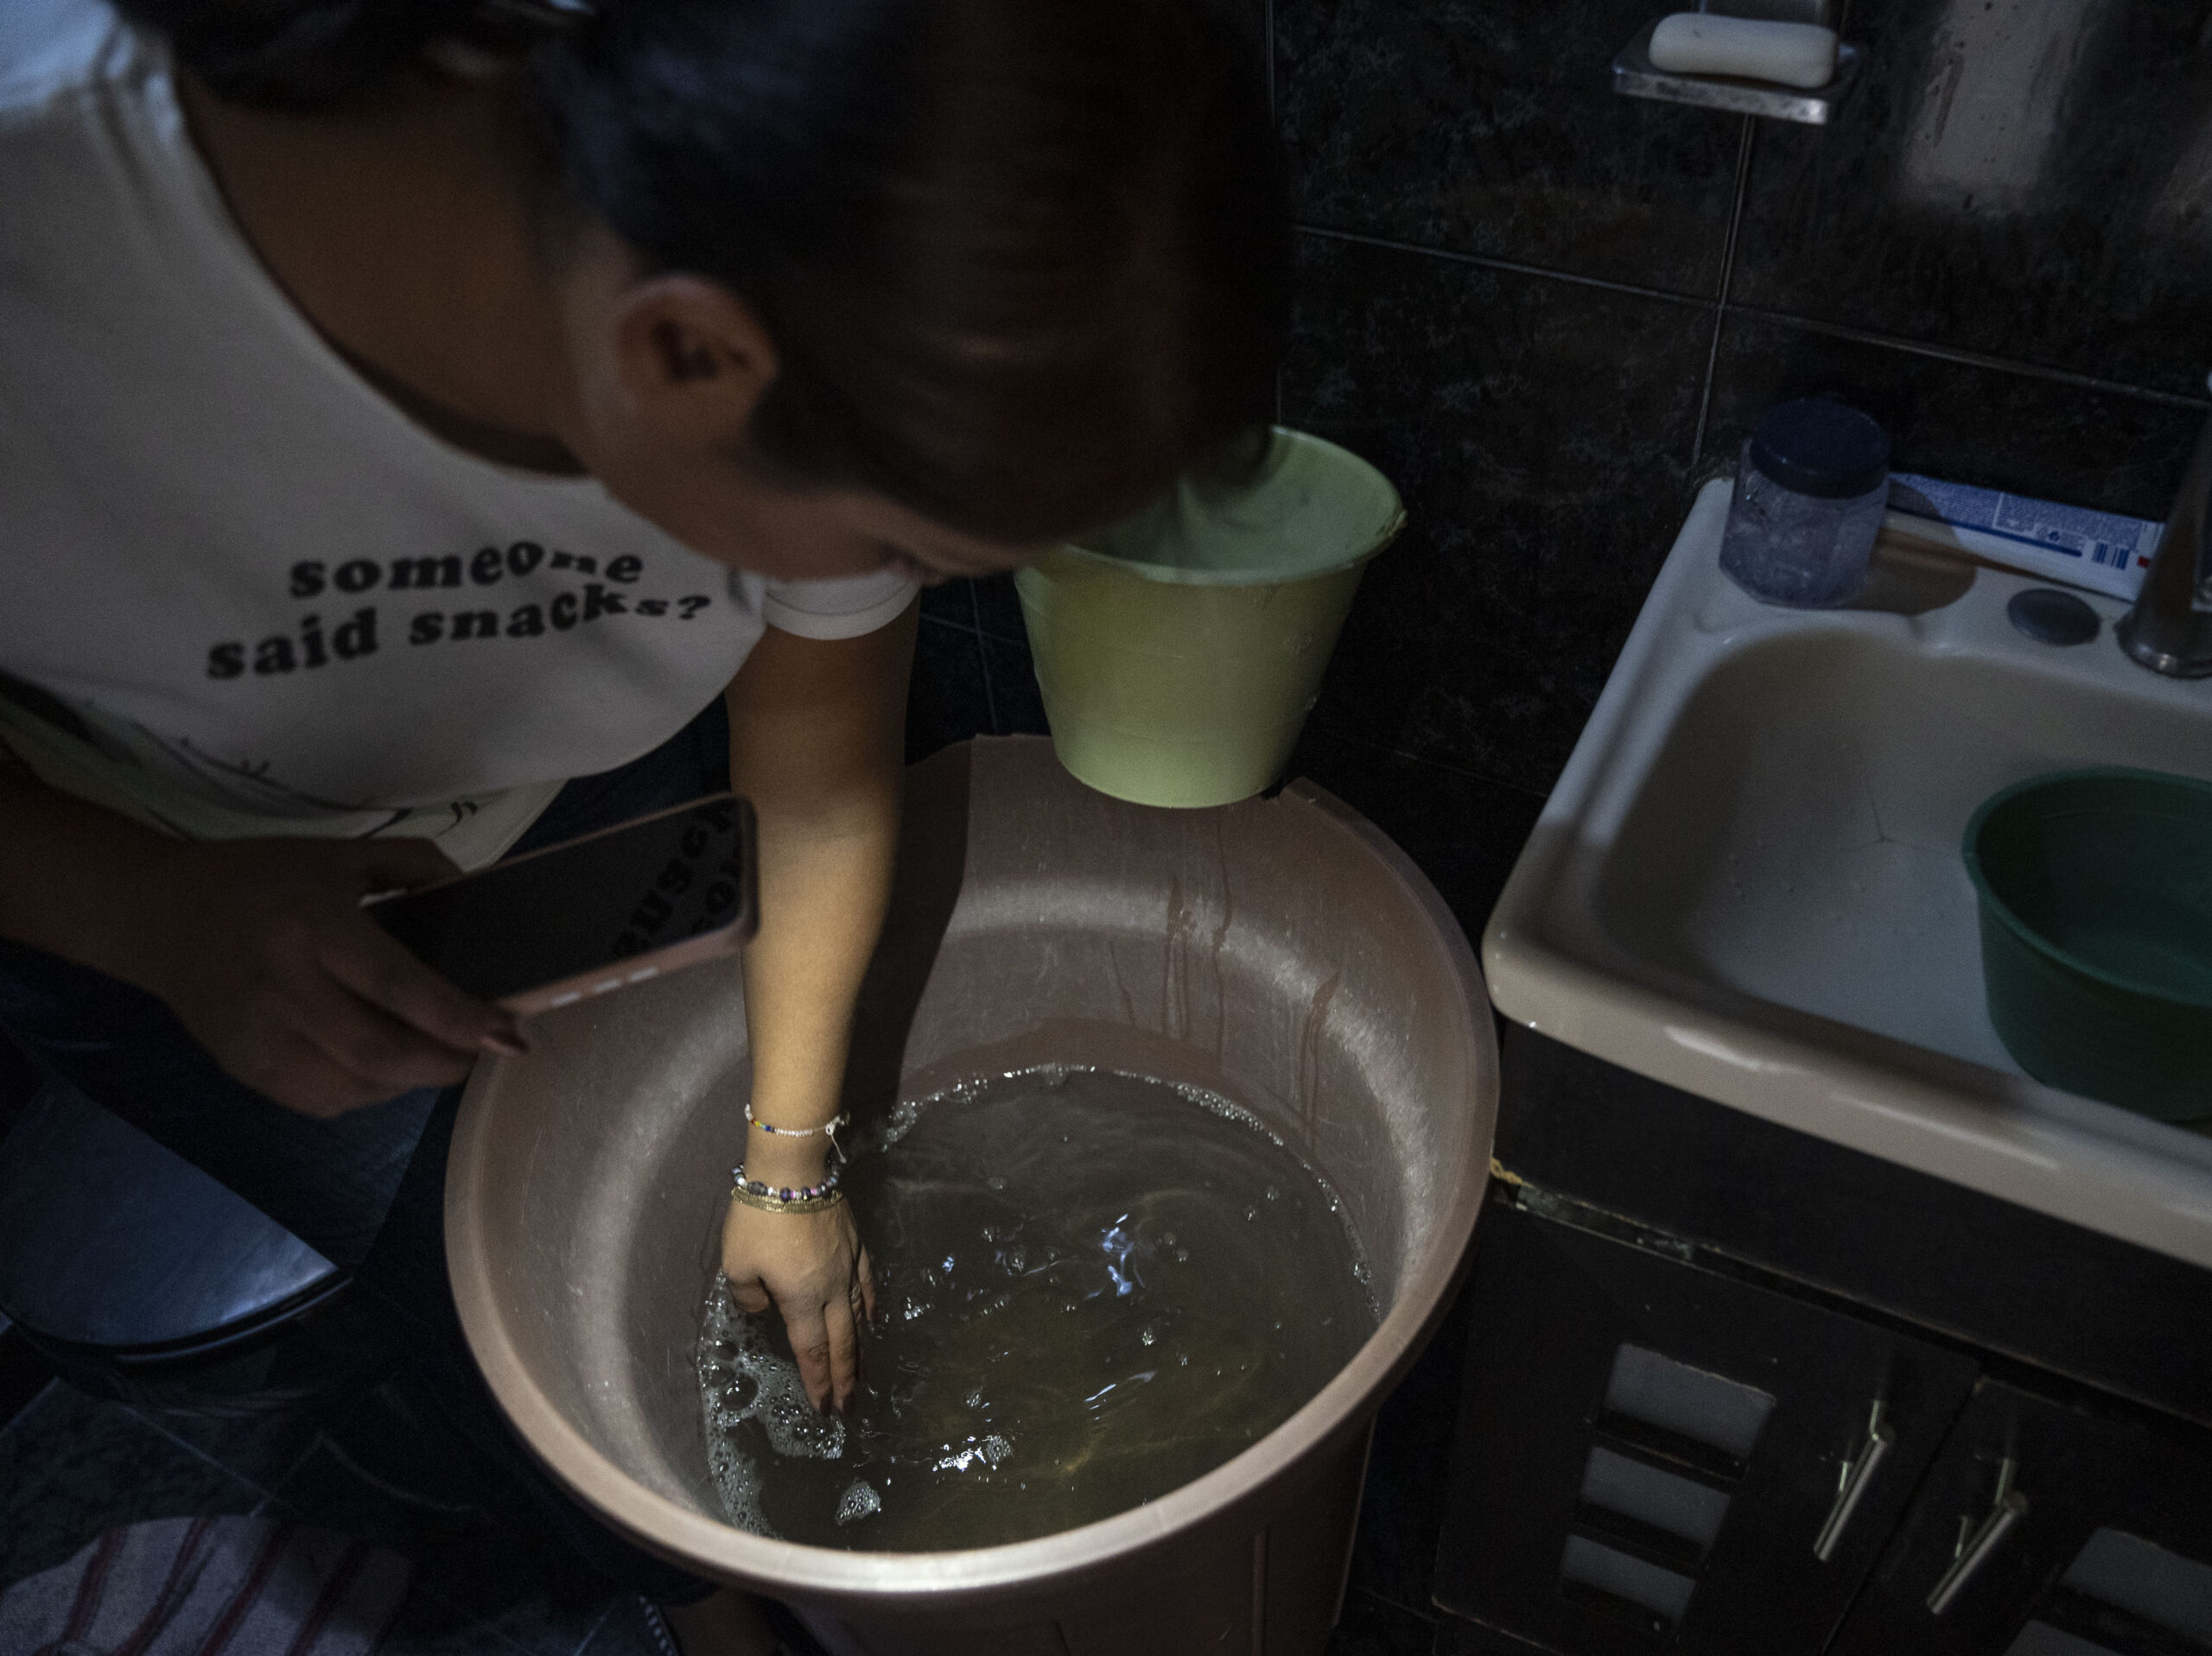 Mexico City’s long-running water problems are getting even worse